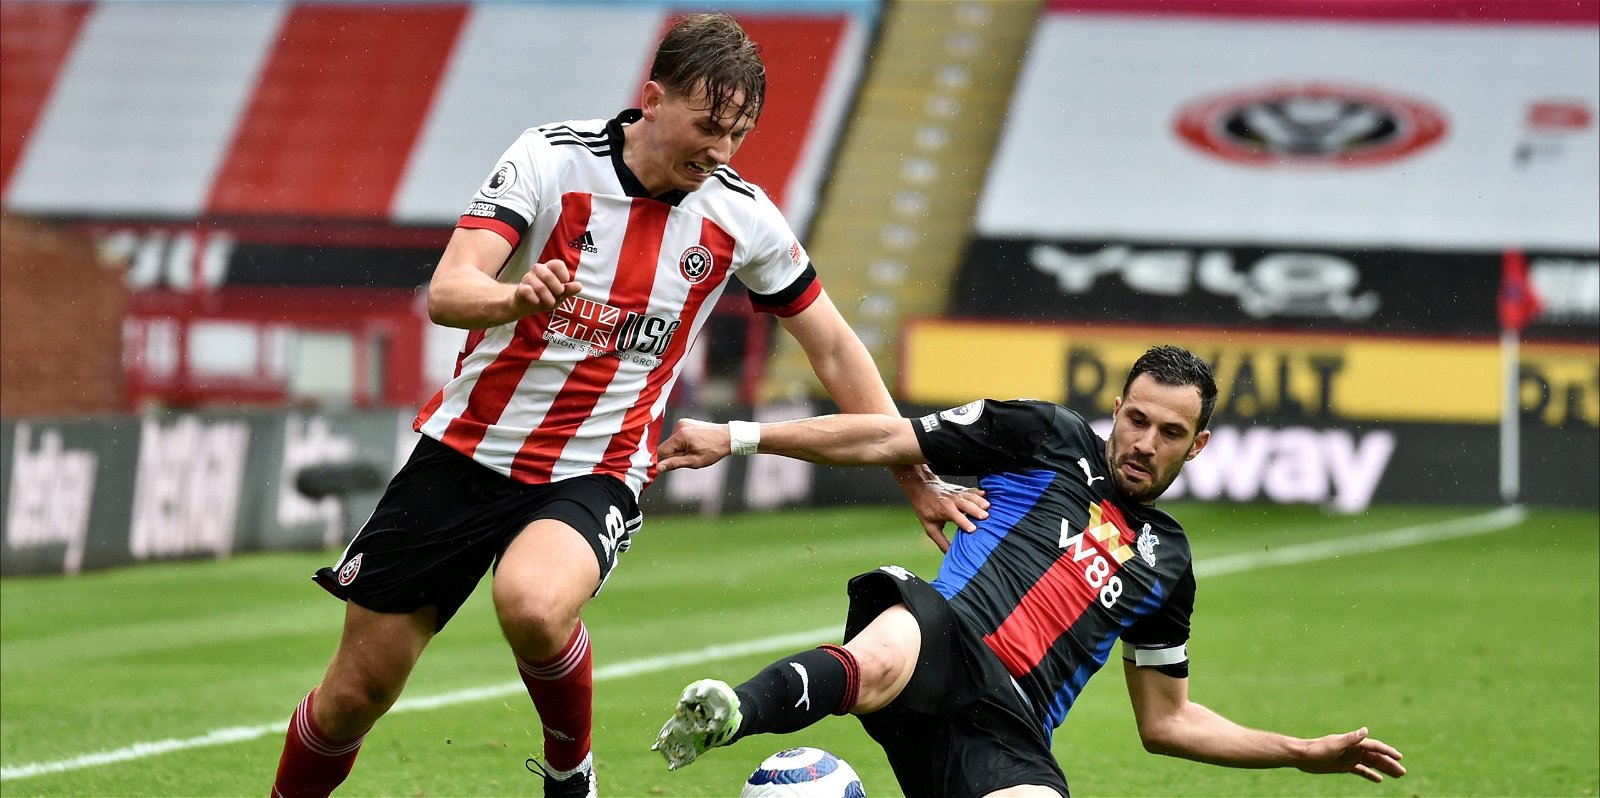 Arsenal, Arsenal could attempt audacious double deal for Sheffield United pair, reporter claims